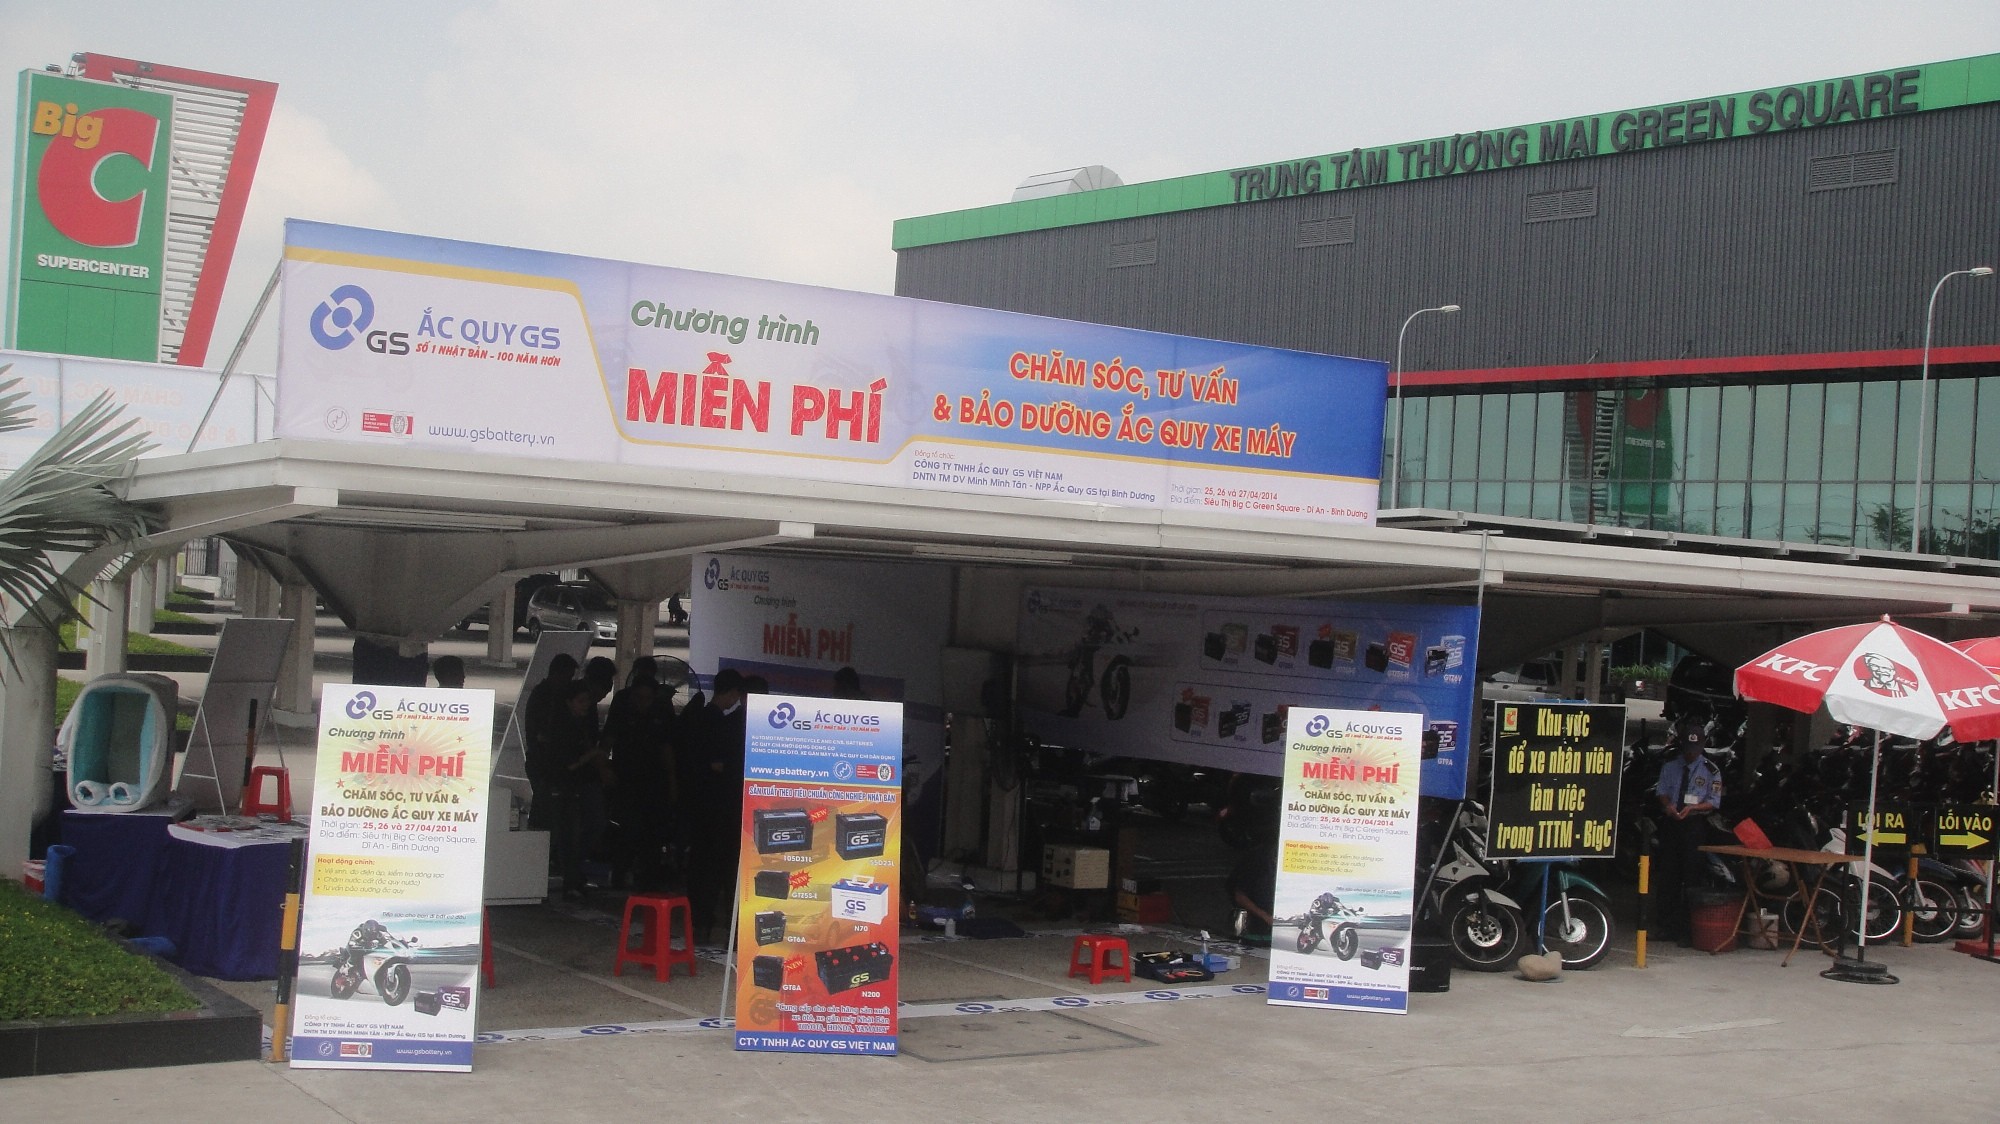 GSV ORGANIZE EVENT FREE “TAKE CARE, CONSULT & MAINTENANCE BATTERY OF MOTORBIKE” IN BINH DUONG